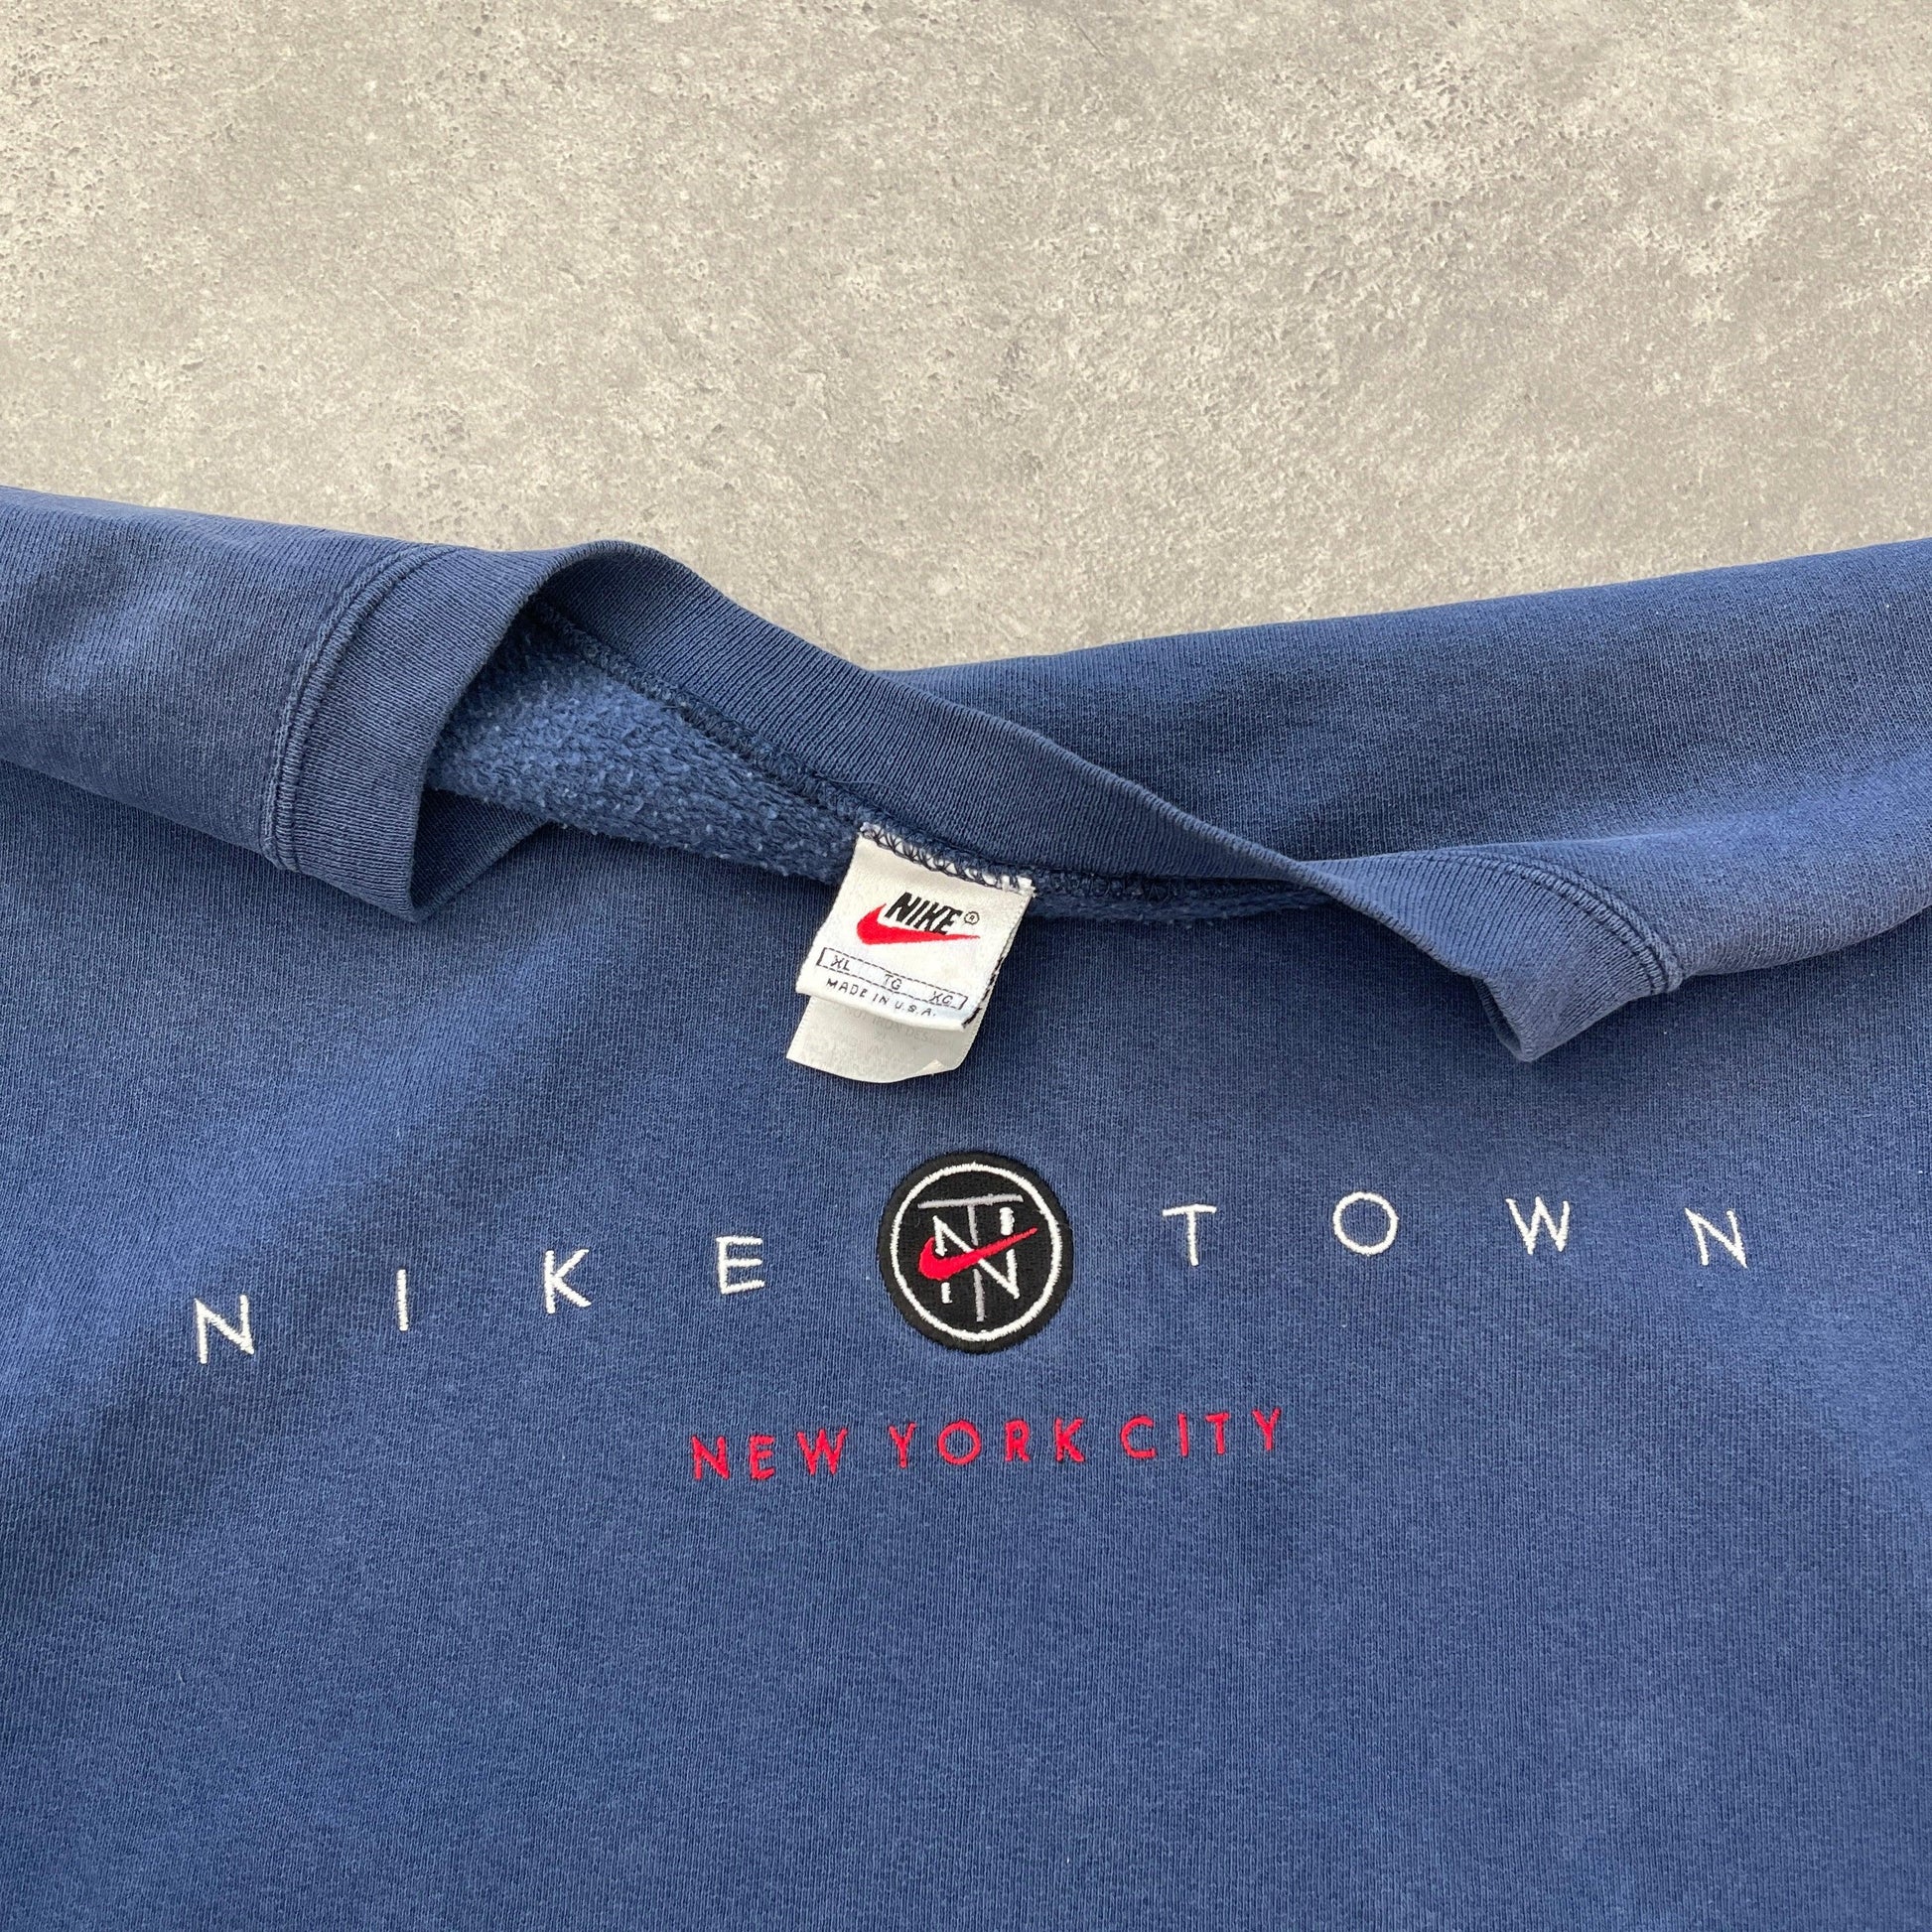 Nike Town New York RARE 1990s heavyweight embroidered sweatshirt (XL) - Known Source